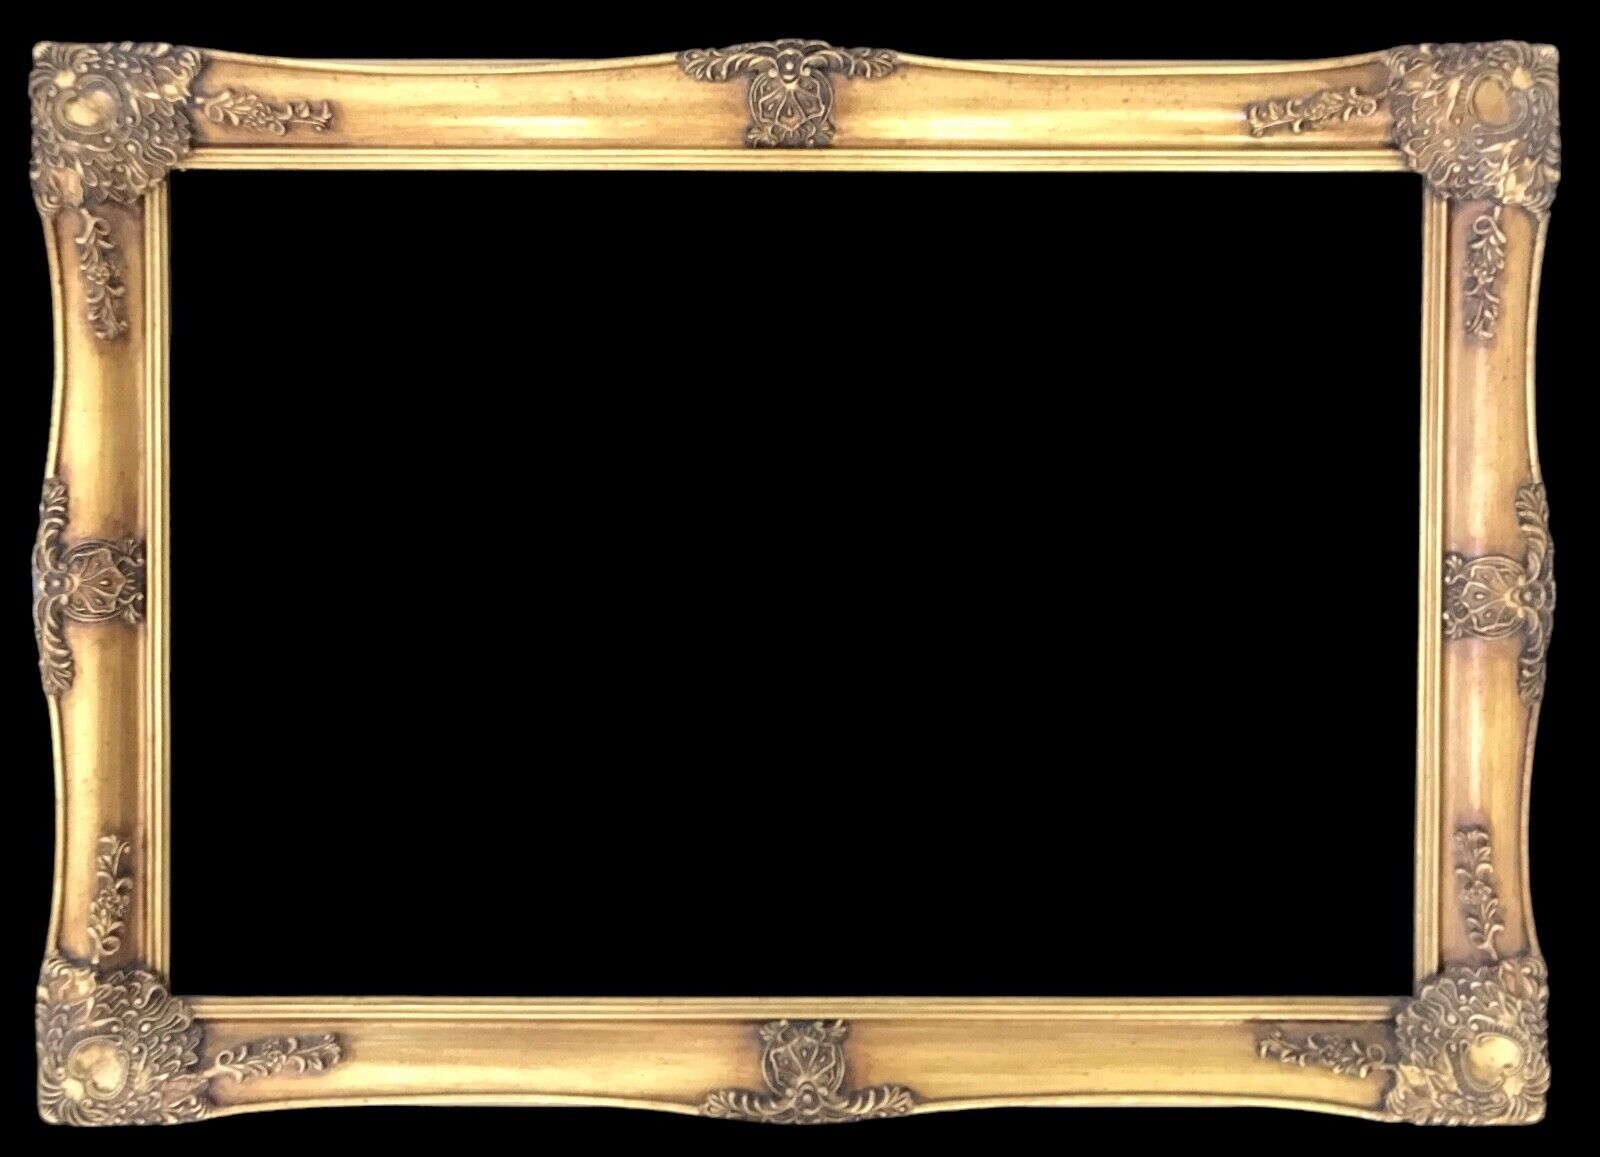 Large Gorgeous Ornate Gesso Gold Gilt Art Deco Solid Wood Frame~Fits 35.5”x23.5”